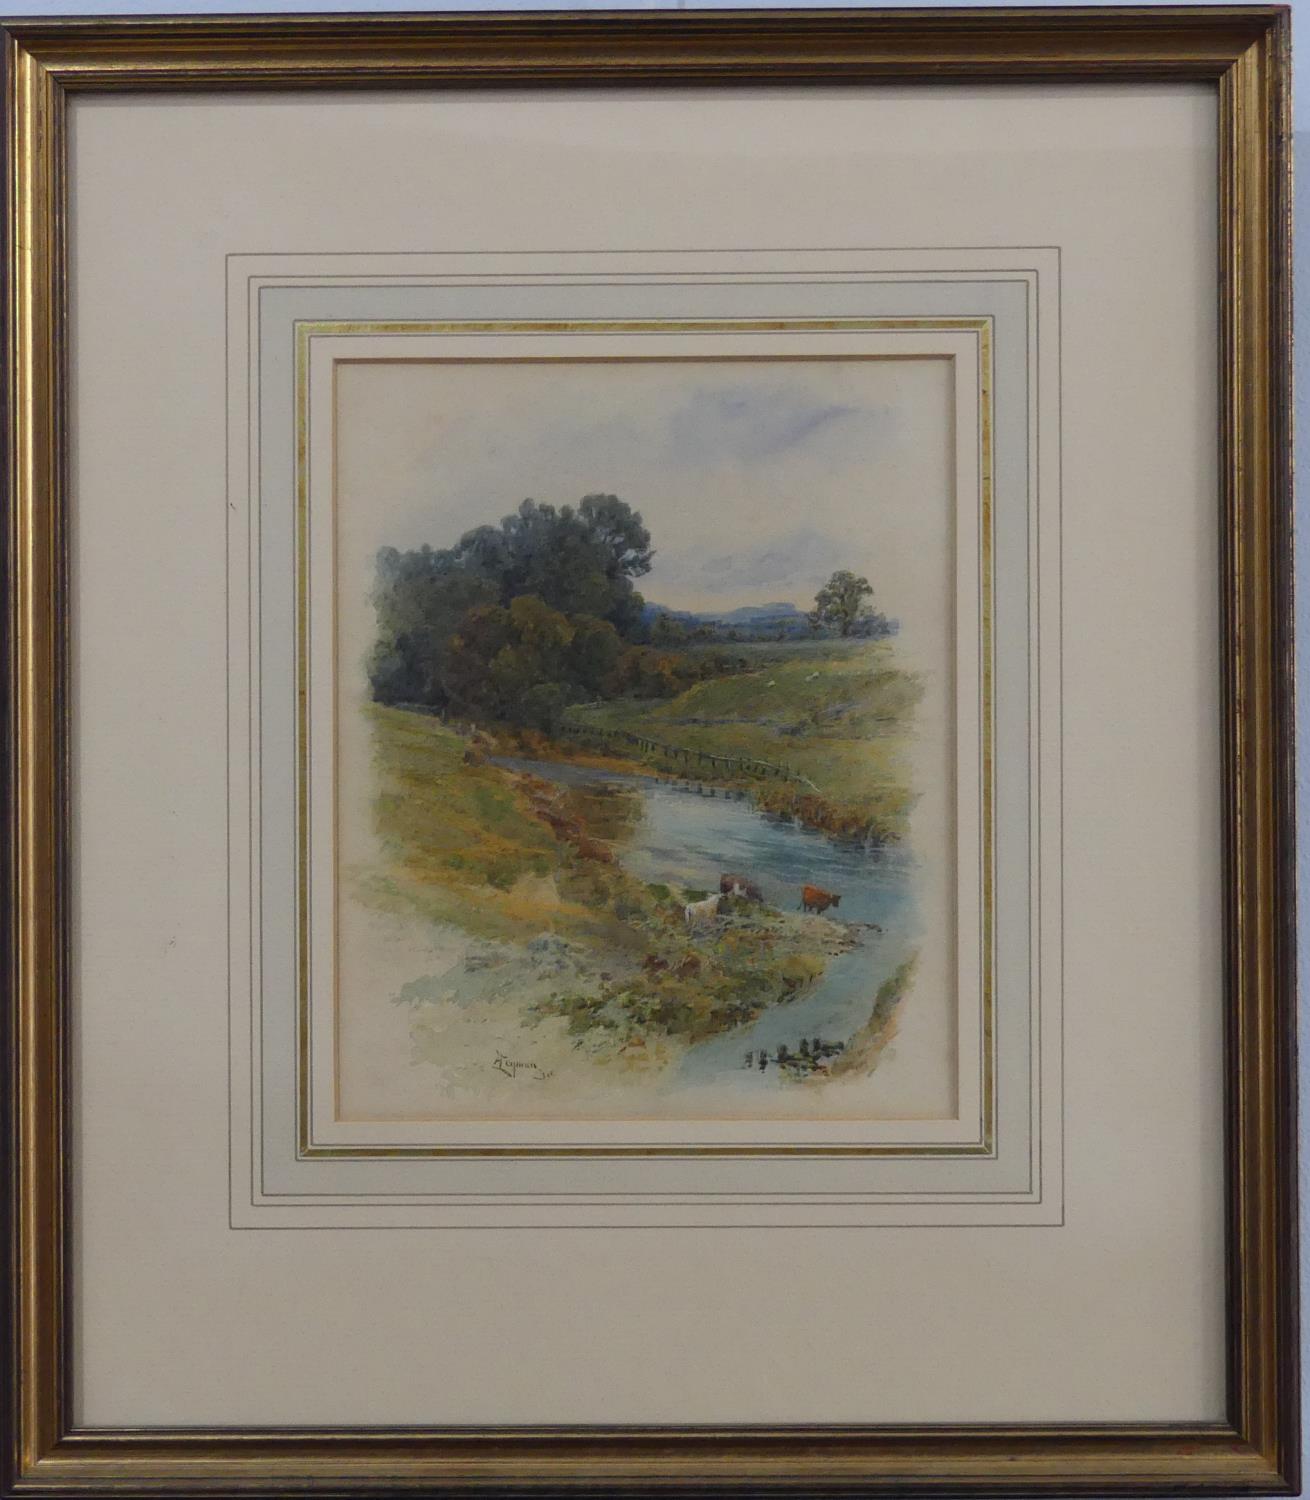 Alfred Leyman (British, 1856-1933), The Otter from Allez Vous Lane, Honiton, watercolour, signed,